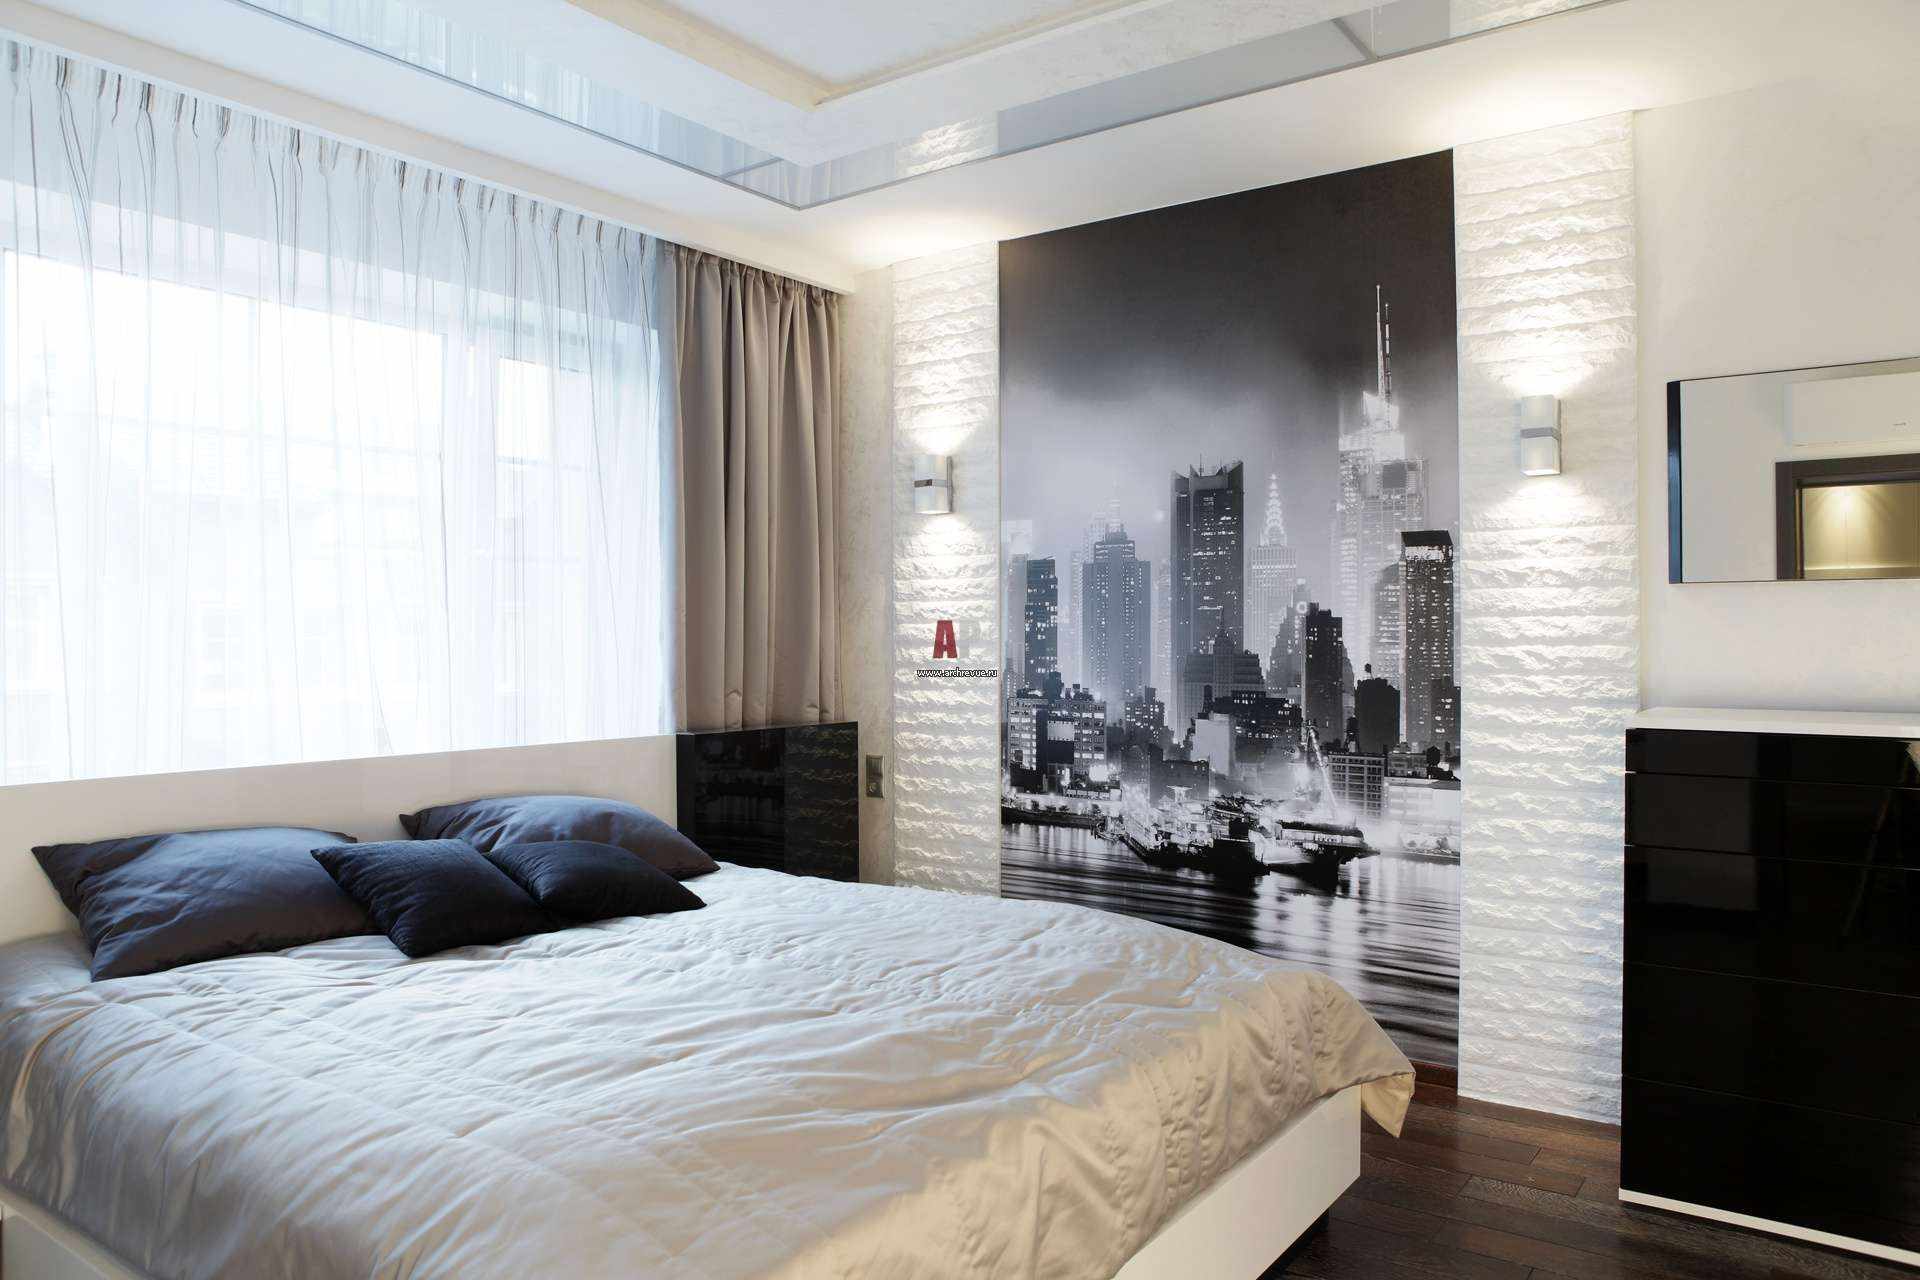 the idea of ​​a bright decoration of the style of the walls in the bedroom